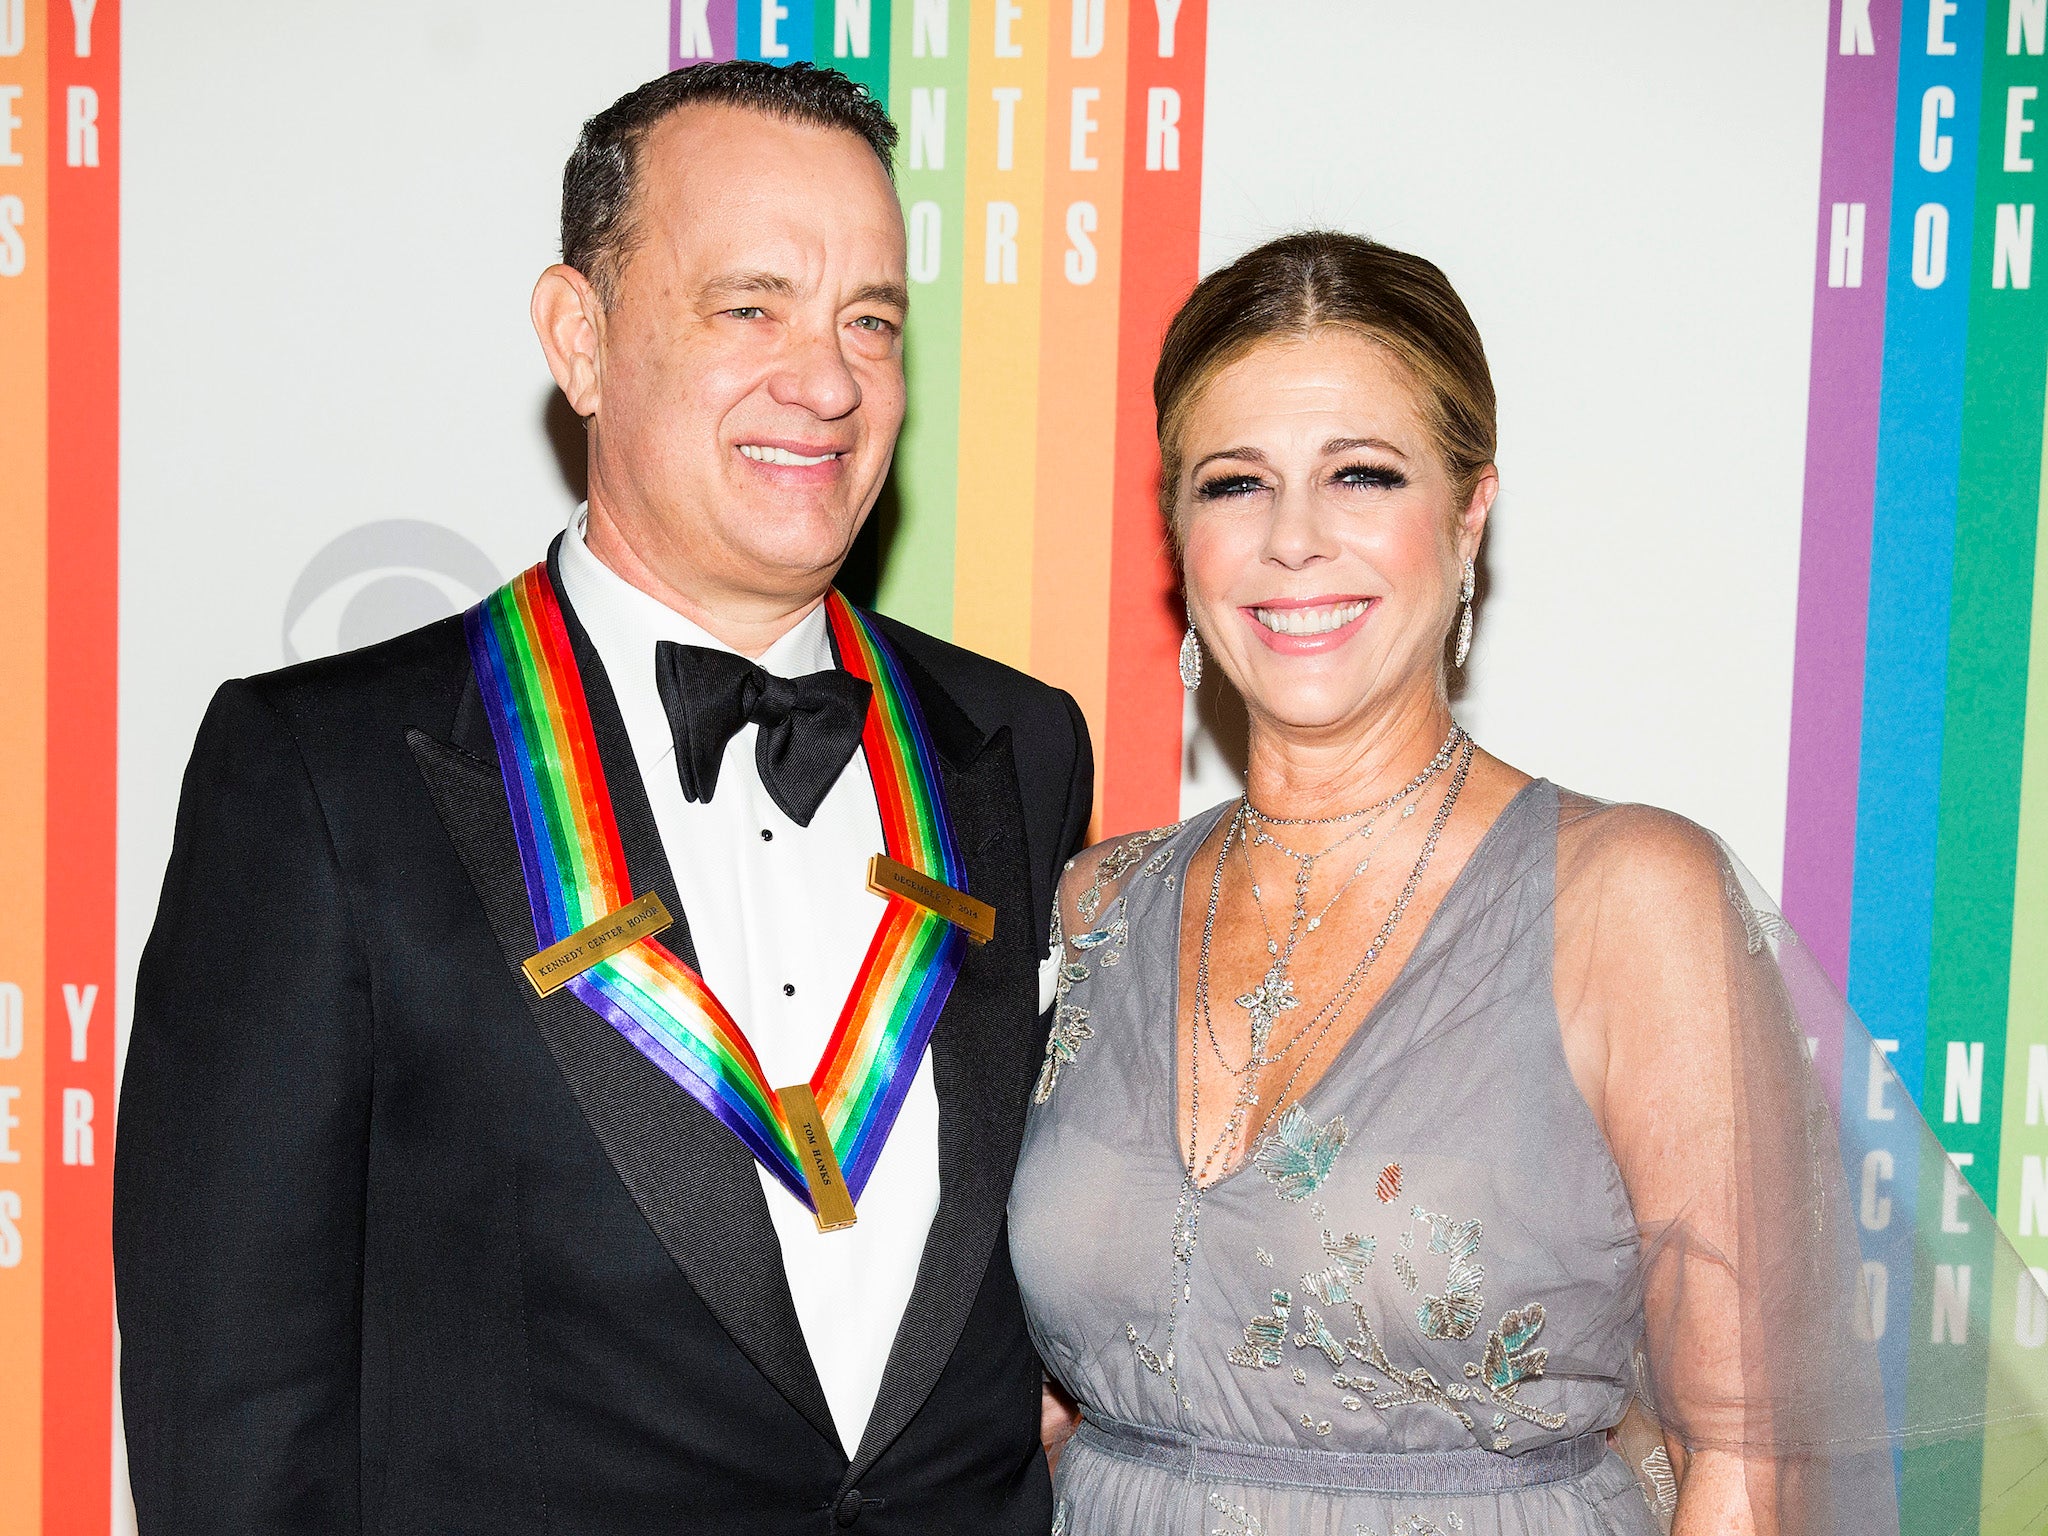 Rita Wilson revealed she had been diagnosed with breast cancer